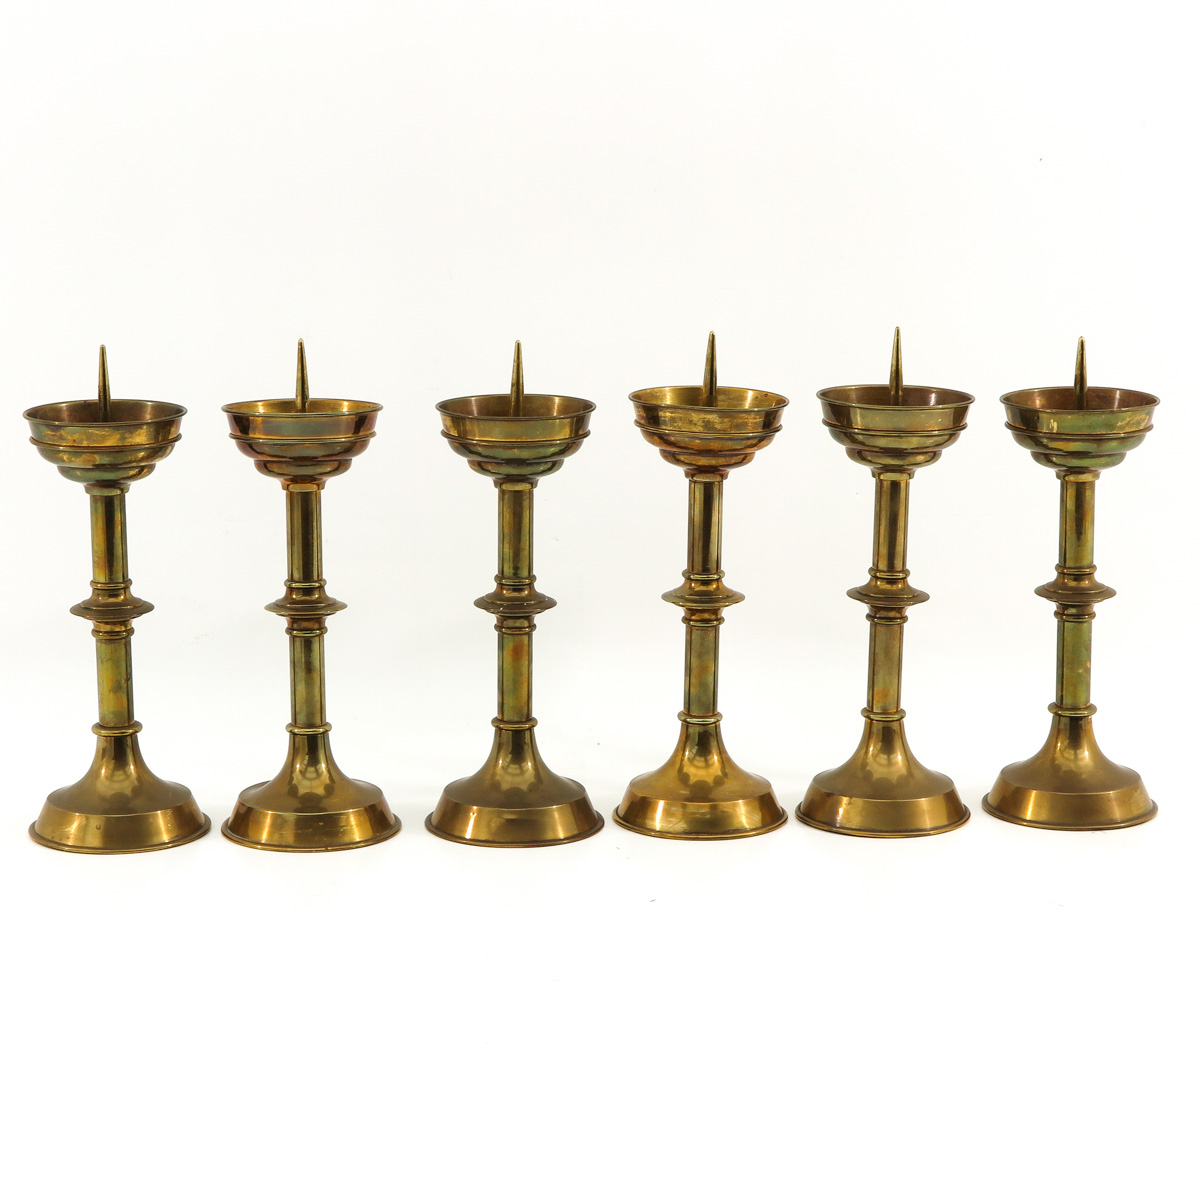 A Set of 6 Yellow Copper Altar Candlesticks